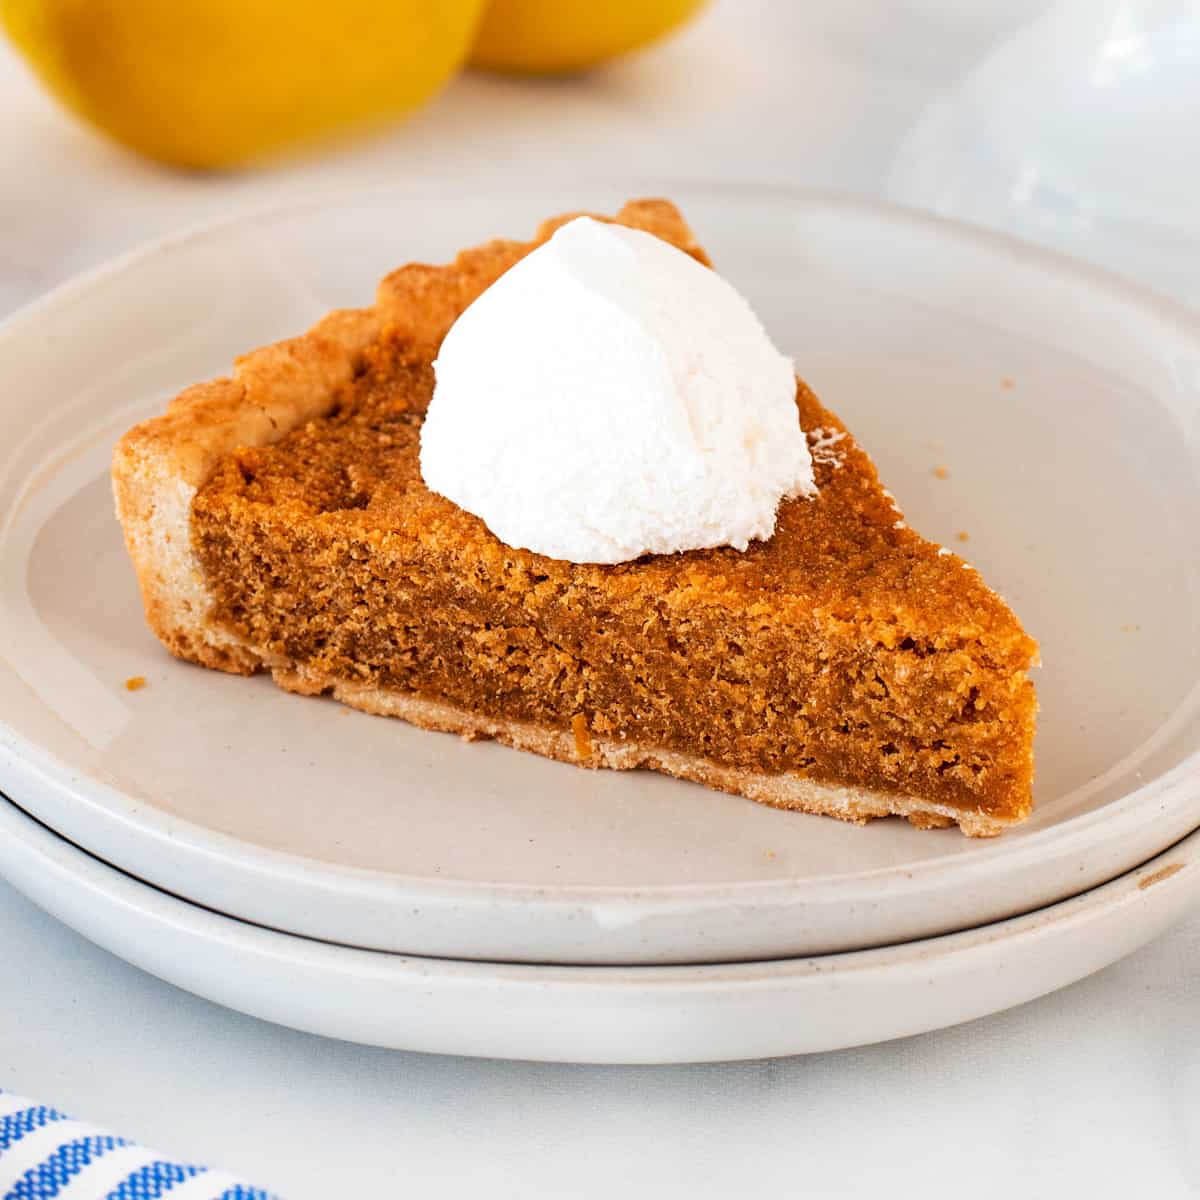 Square photo of treacle tart on a plate with whipped cream.